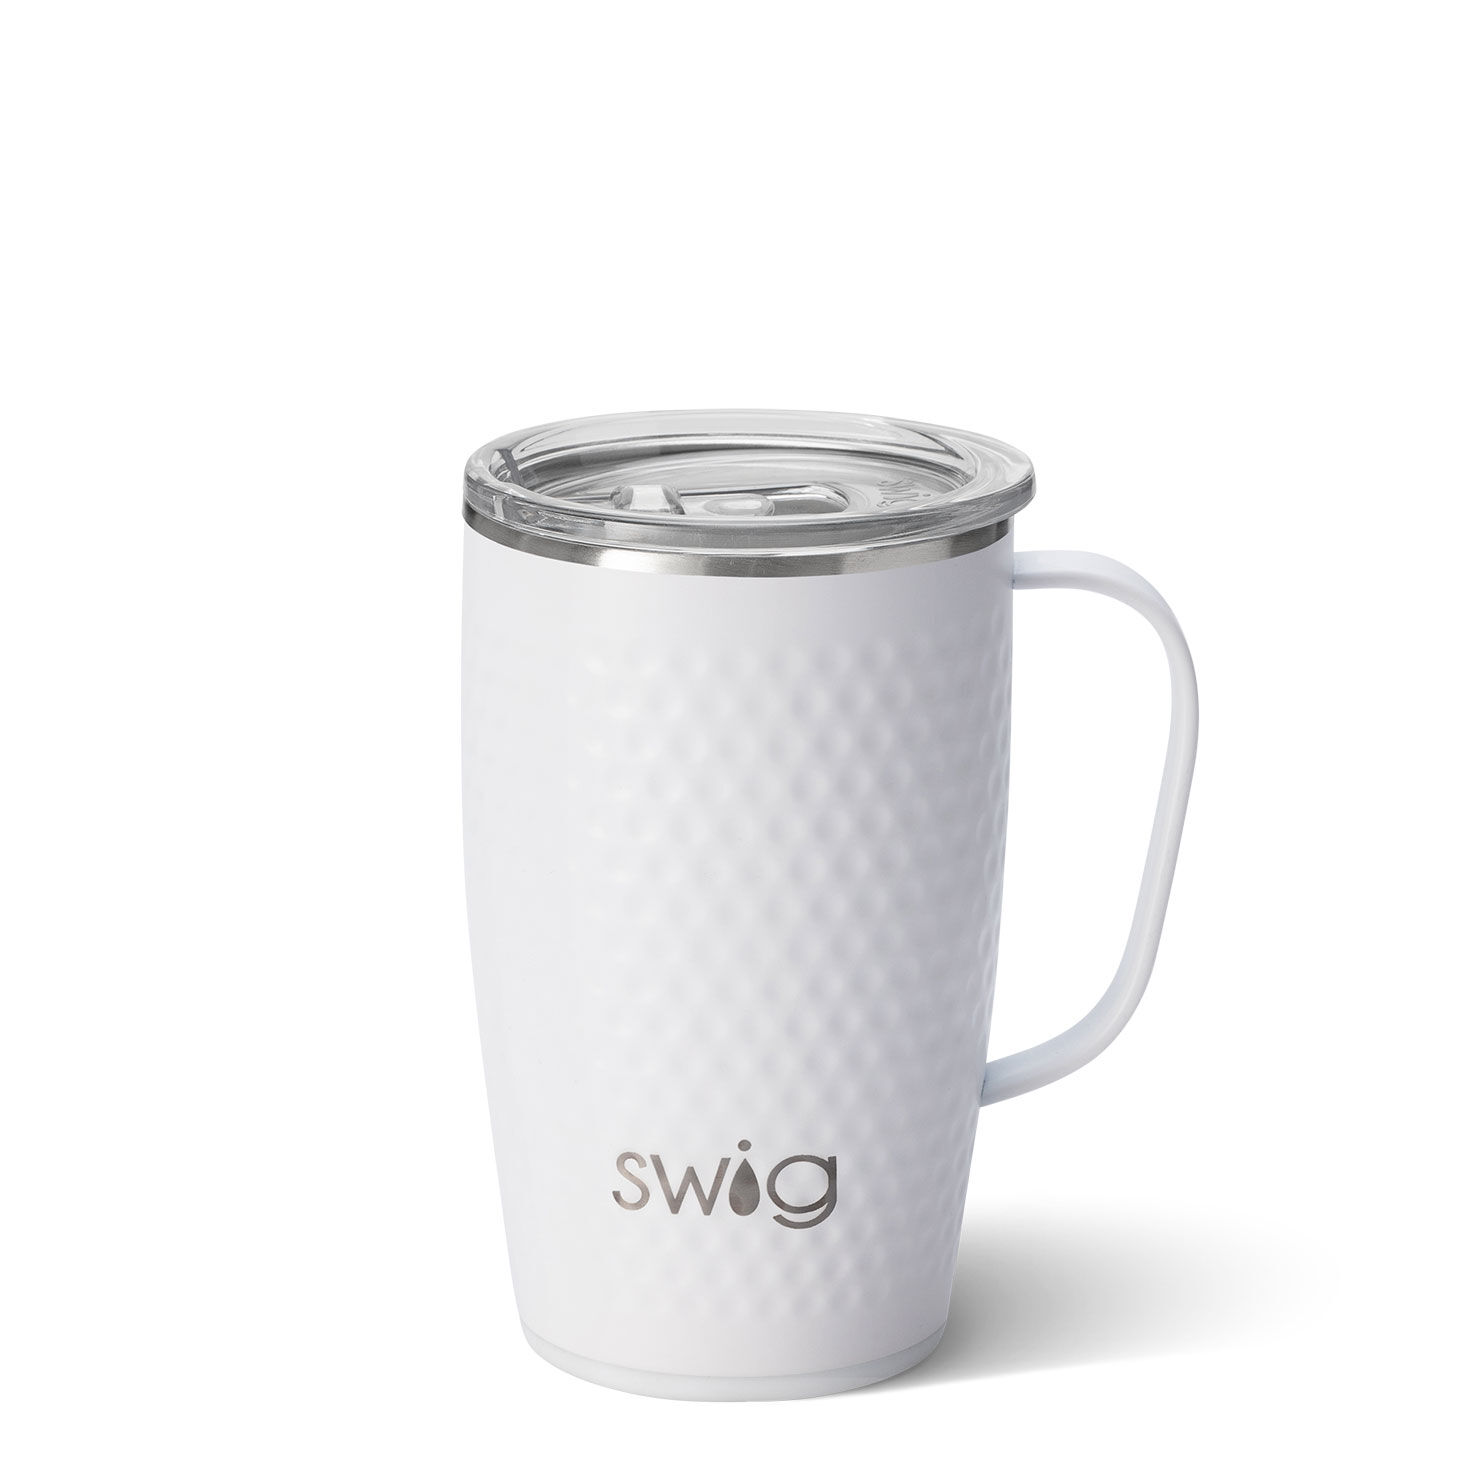 https://www.hallmark.com/dw/image/v2/AALB_PRD/on/demandware.static/-/Sites-hallmark-master/default/dw1dfa2541/images/finished-goods/products/S106C18WH/White-Golf-Ball-Texture-Insulated-Mug-With-Lid_S106C18WH_01.jpg?sfrm=jpg